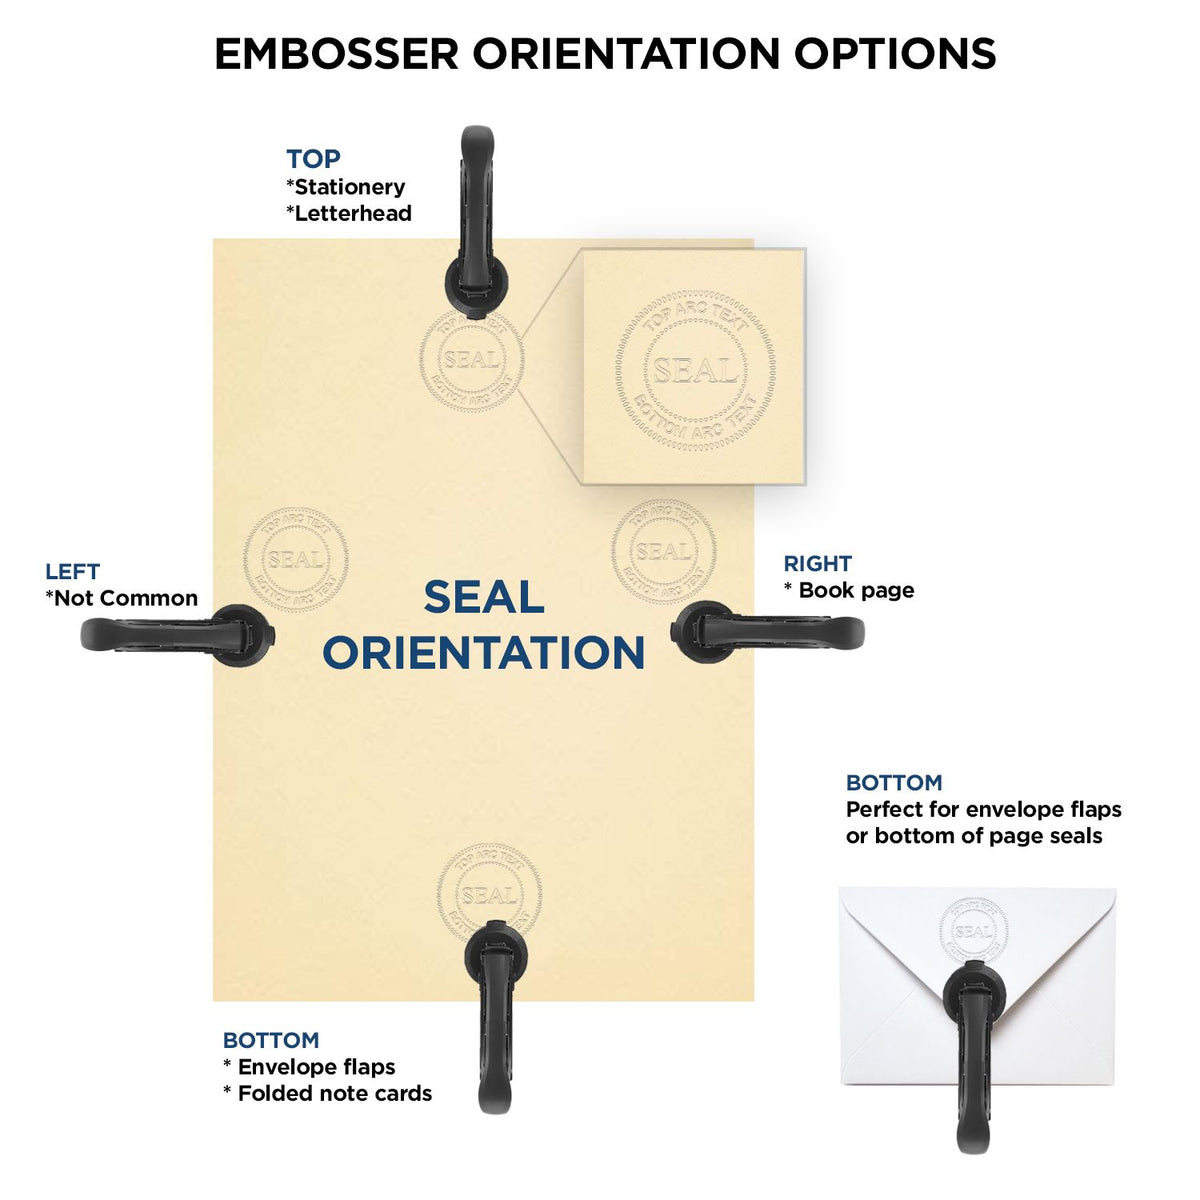 An infographic for the Extended Long Reach Colorado Surveyor Embosser showing embosser orientation, this is showing examples of a top, bottom, right and left insert.